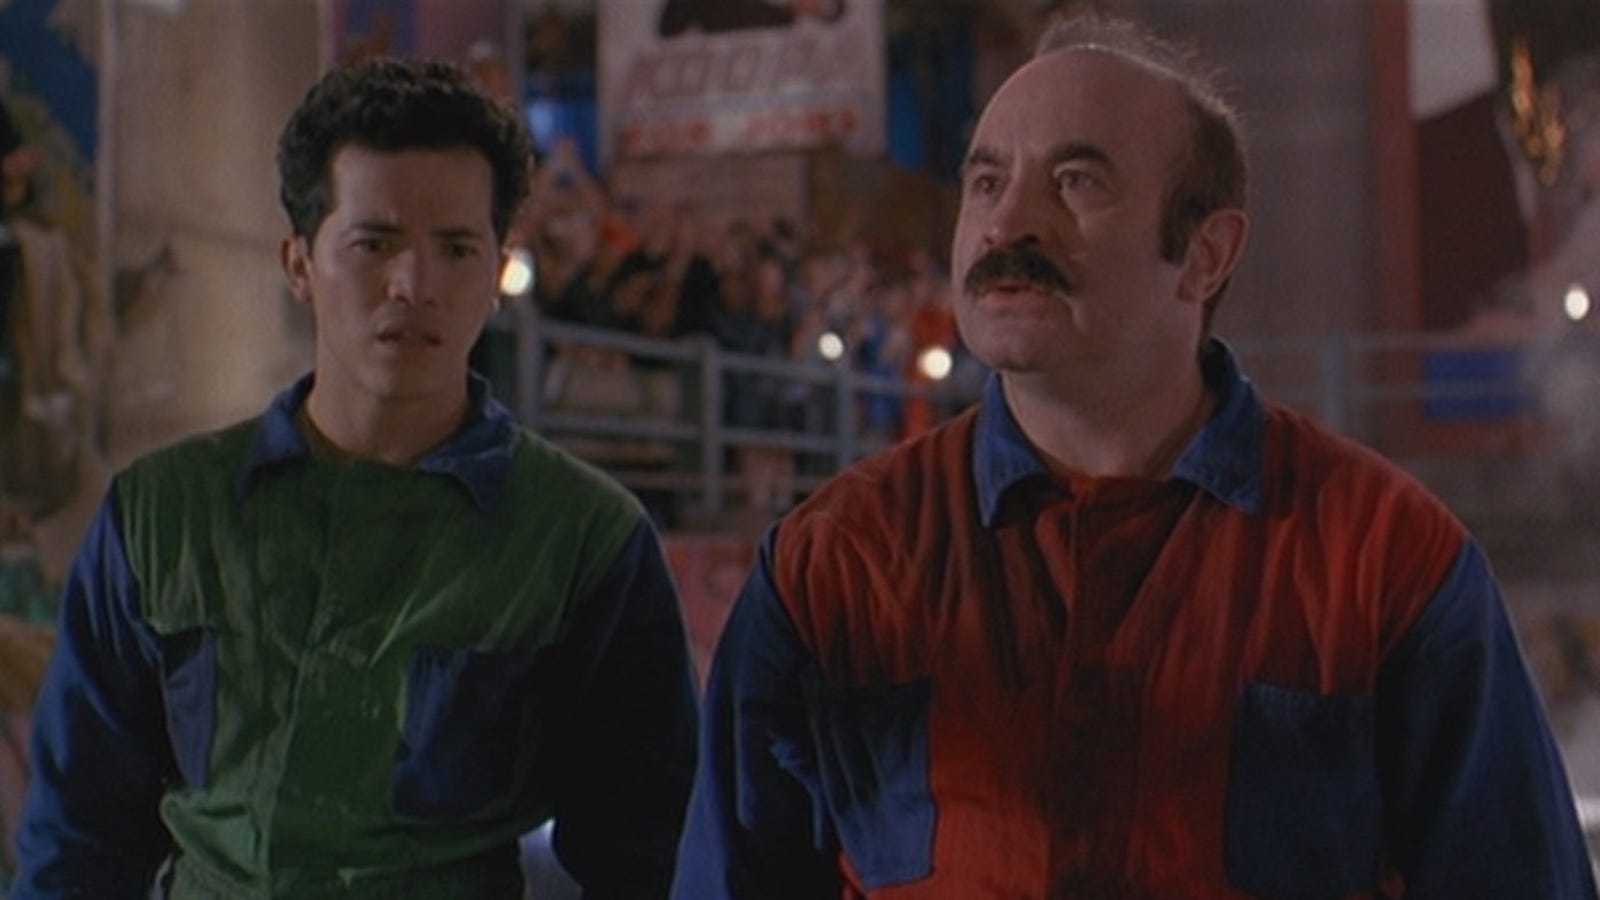 Somewhere in the 'Super Mario Bros.' movie is a vision that's weird ...